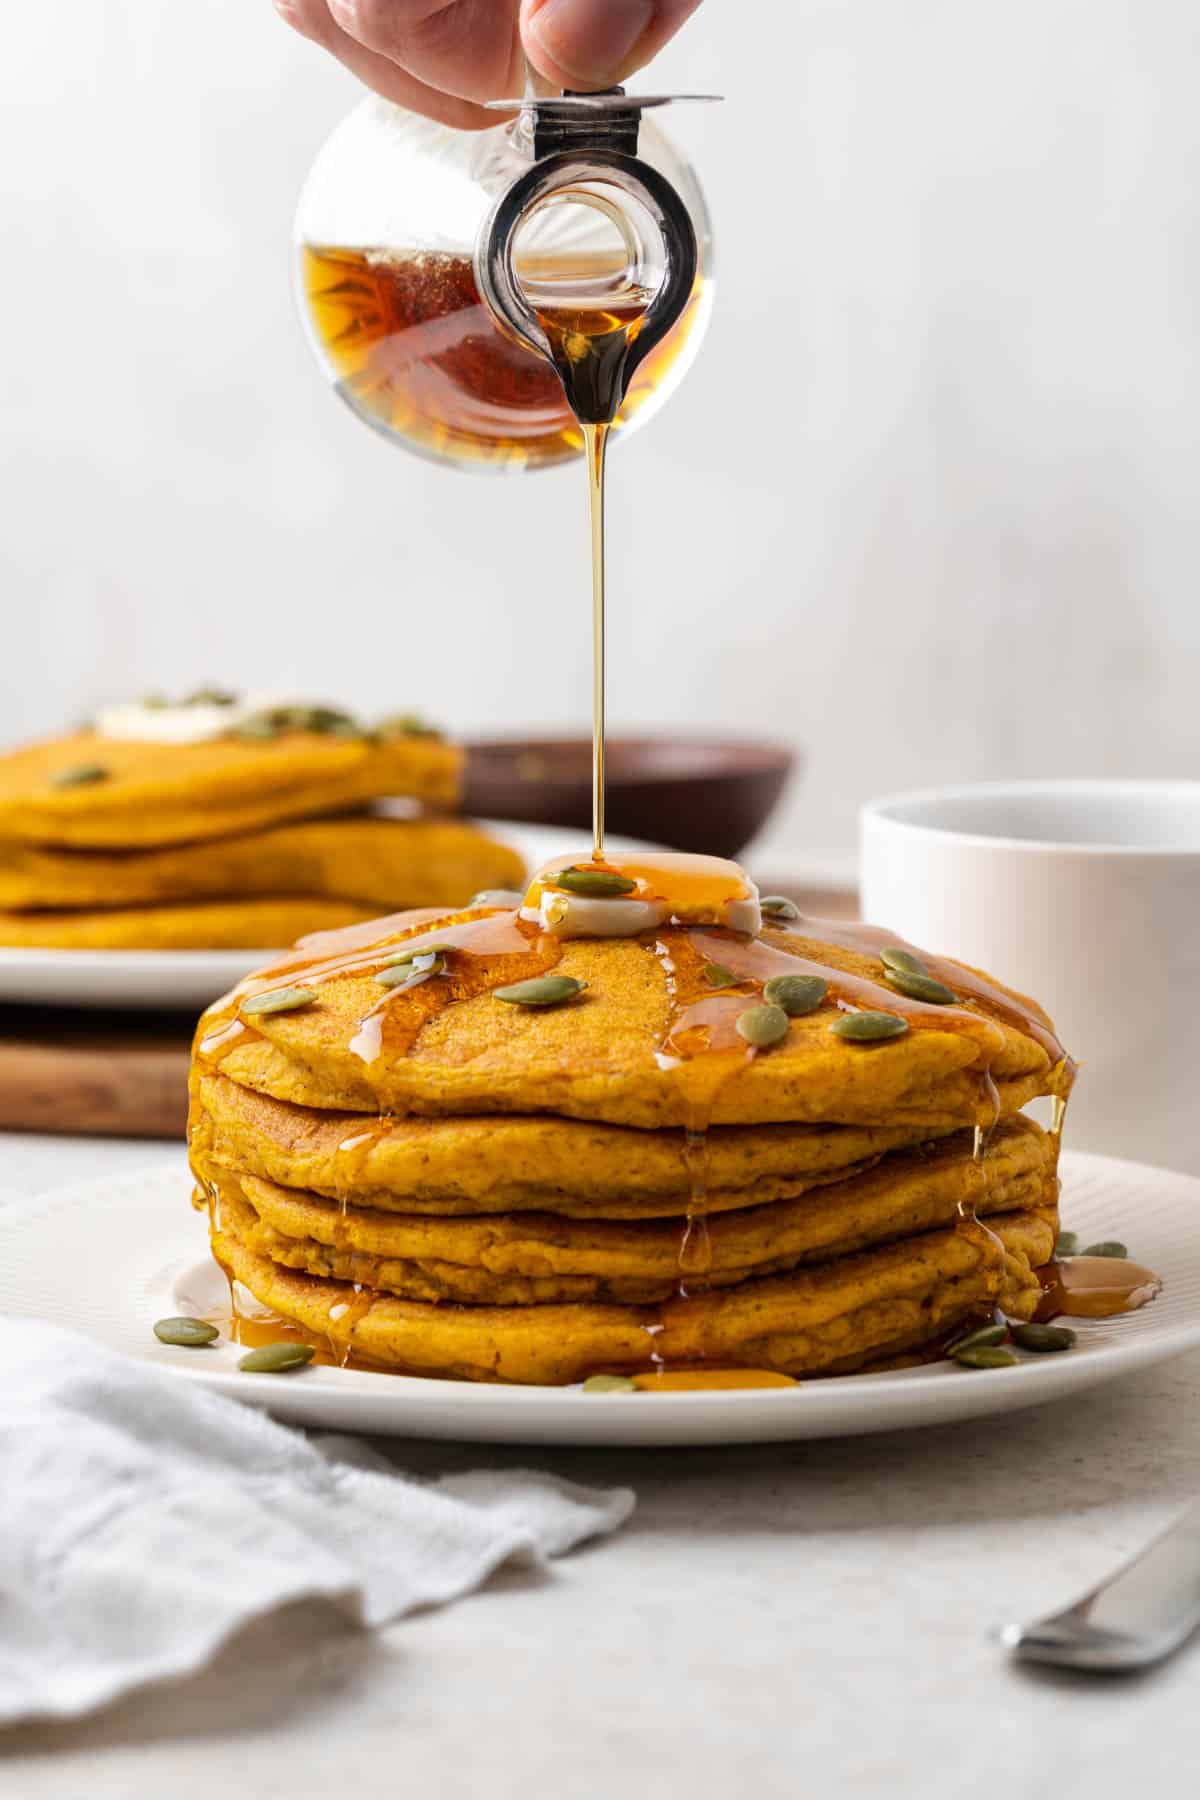 syrup being poured onto a stack of vegan pumpkin pancakes.